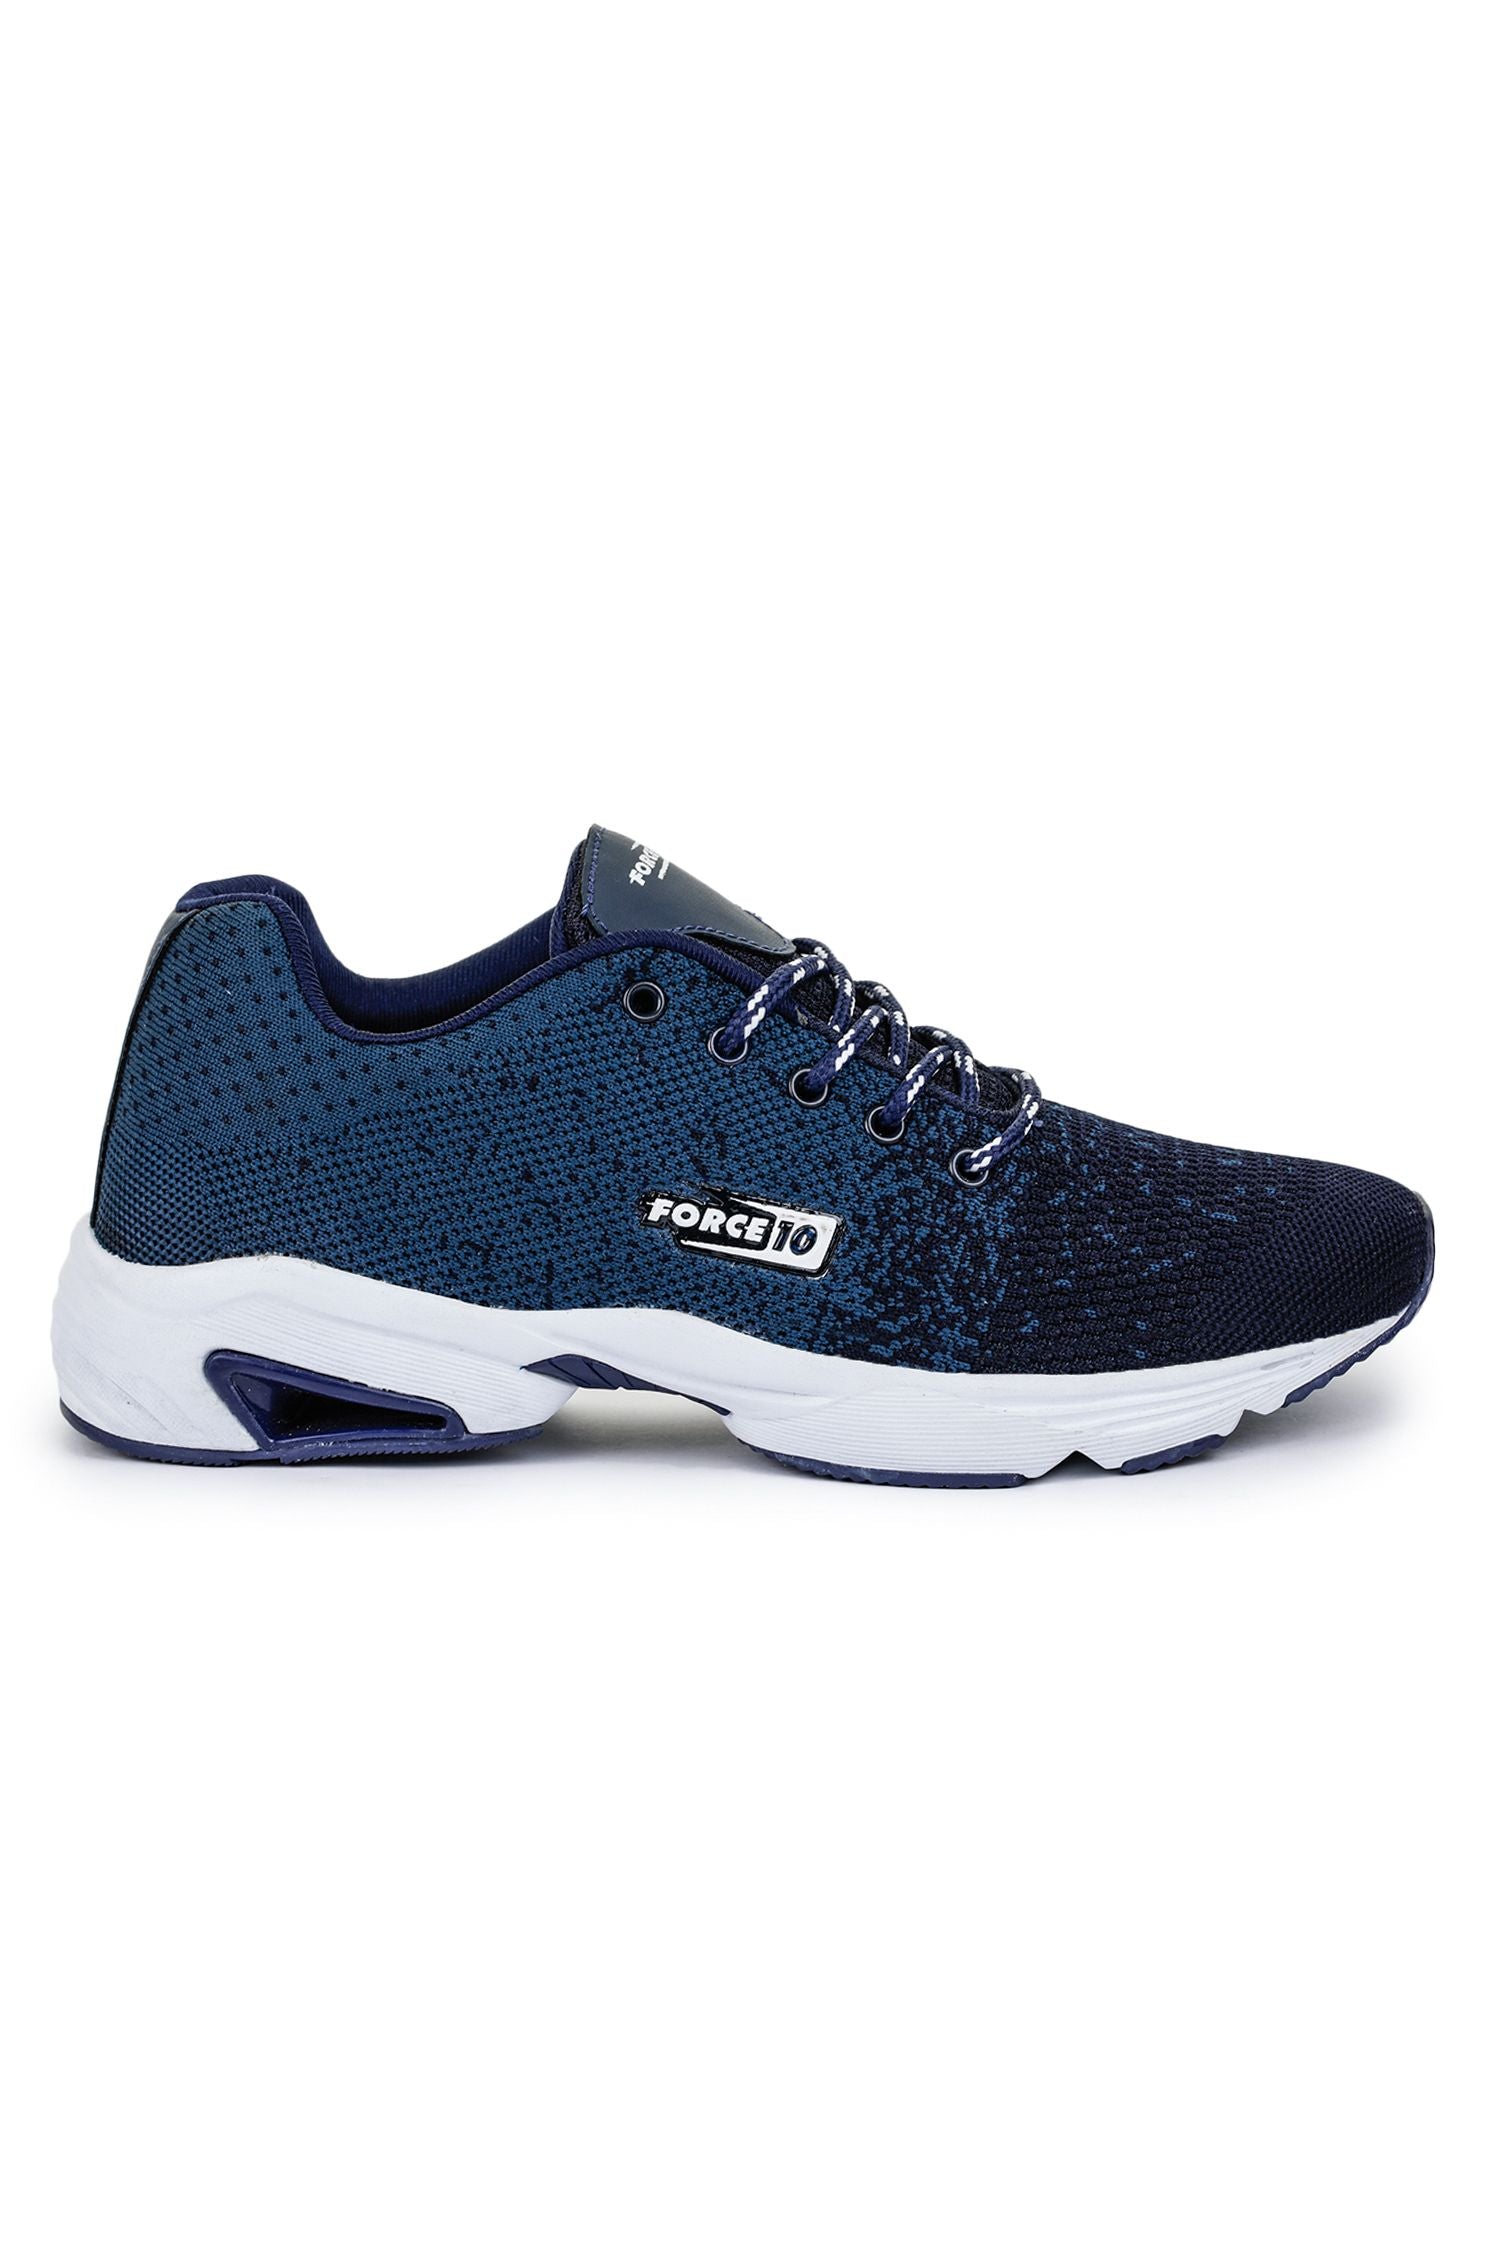 Force 10 By Liberty Sports Shoes For MENS (51314582) | Book Bargain Buy